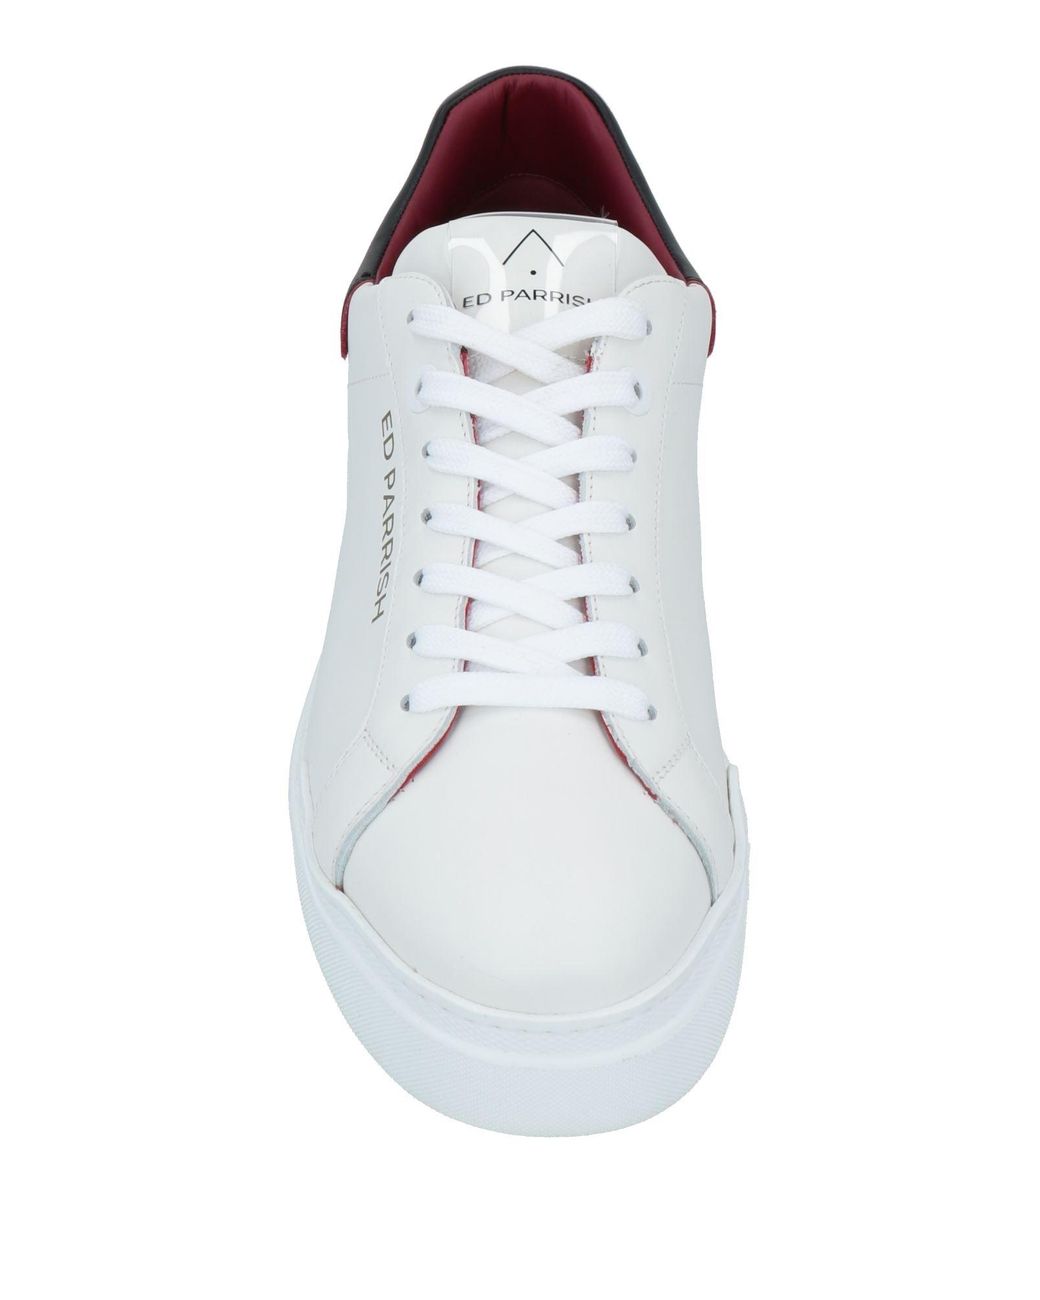 ED PARRISH Leather Sneakers in White for Men | Lyst Australia